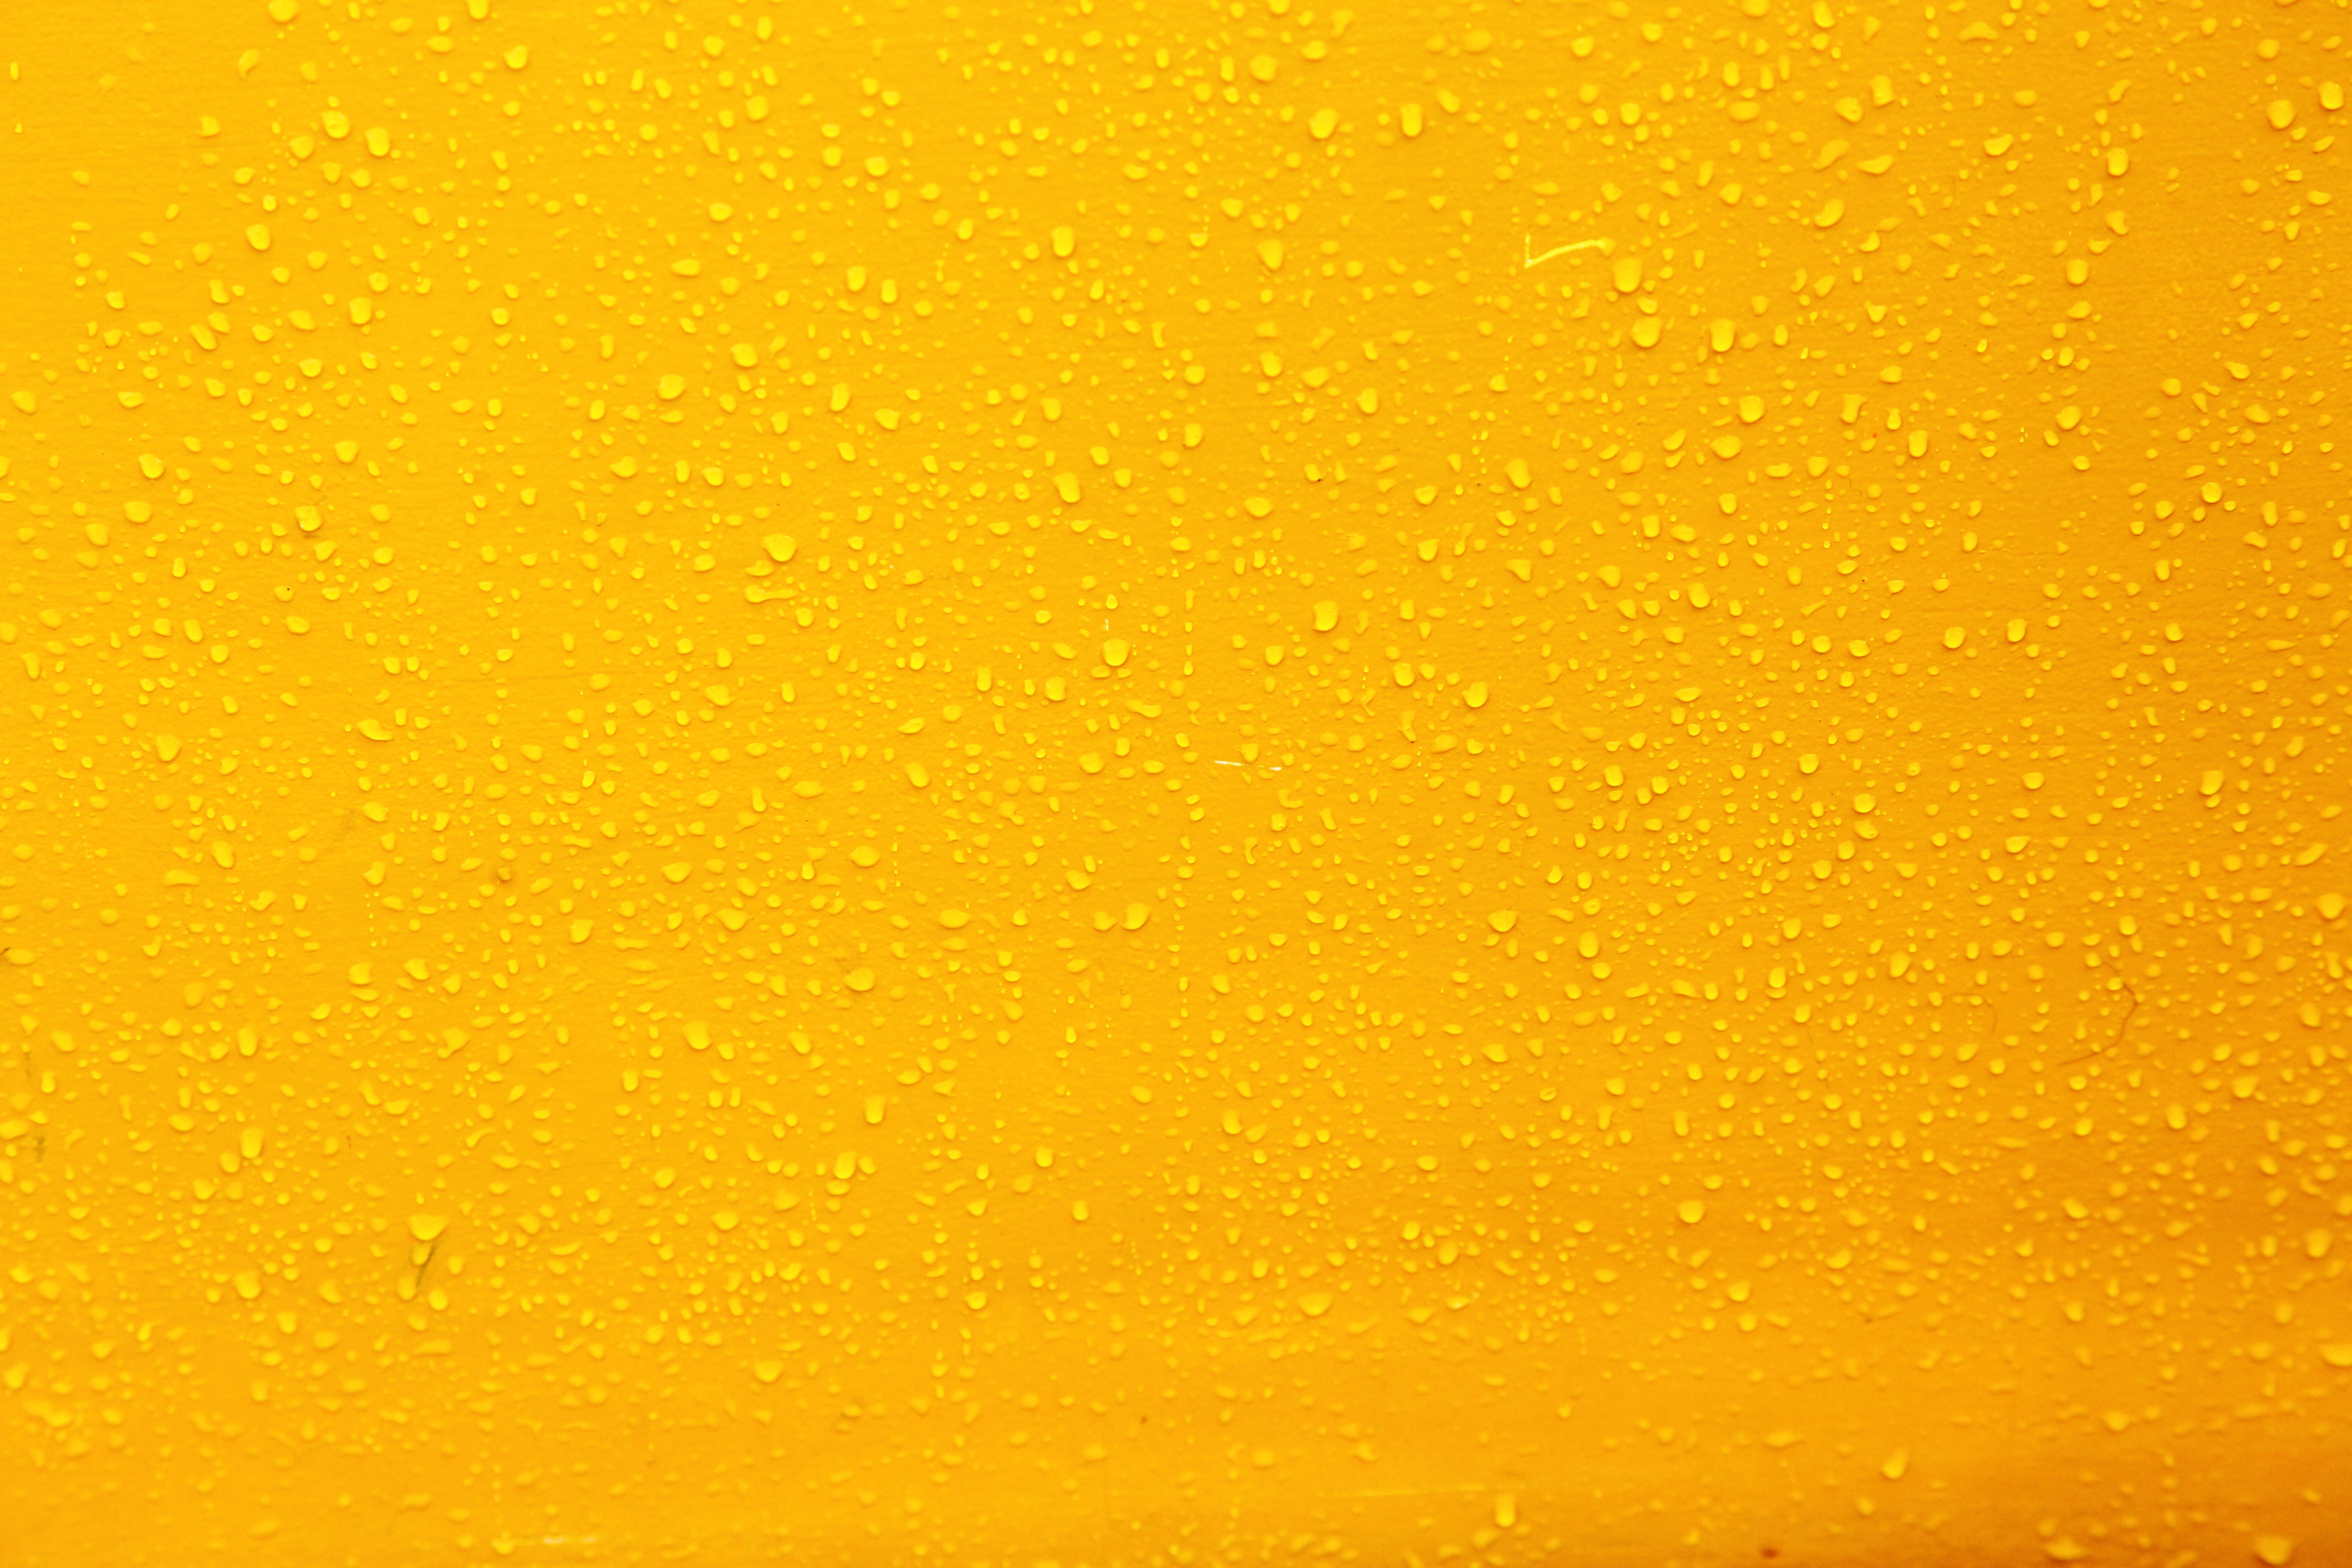 background, yellow, drops, miscellanea, miscellaneous images